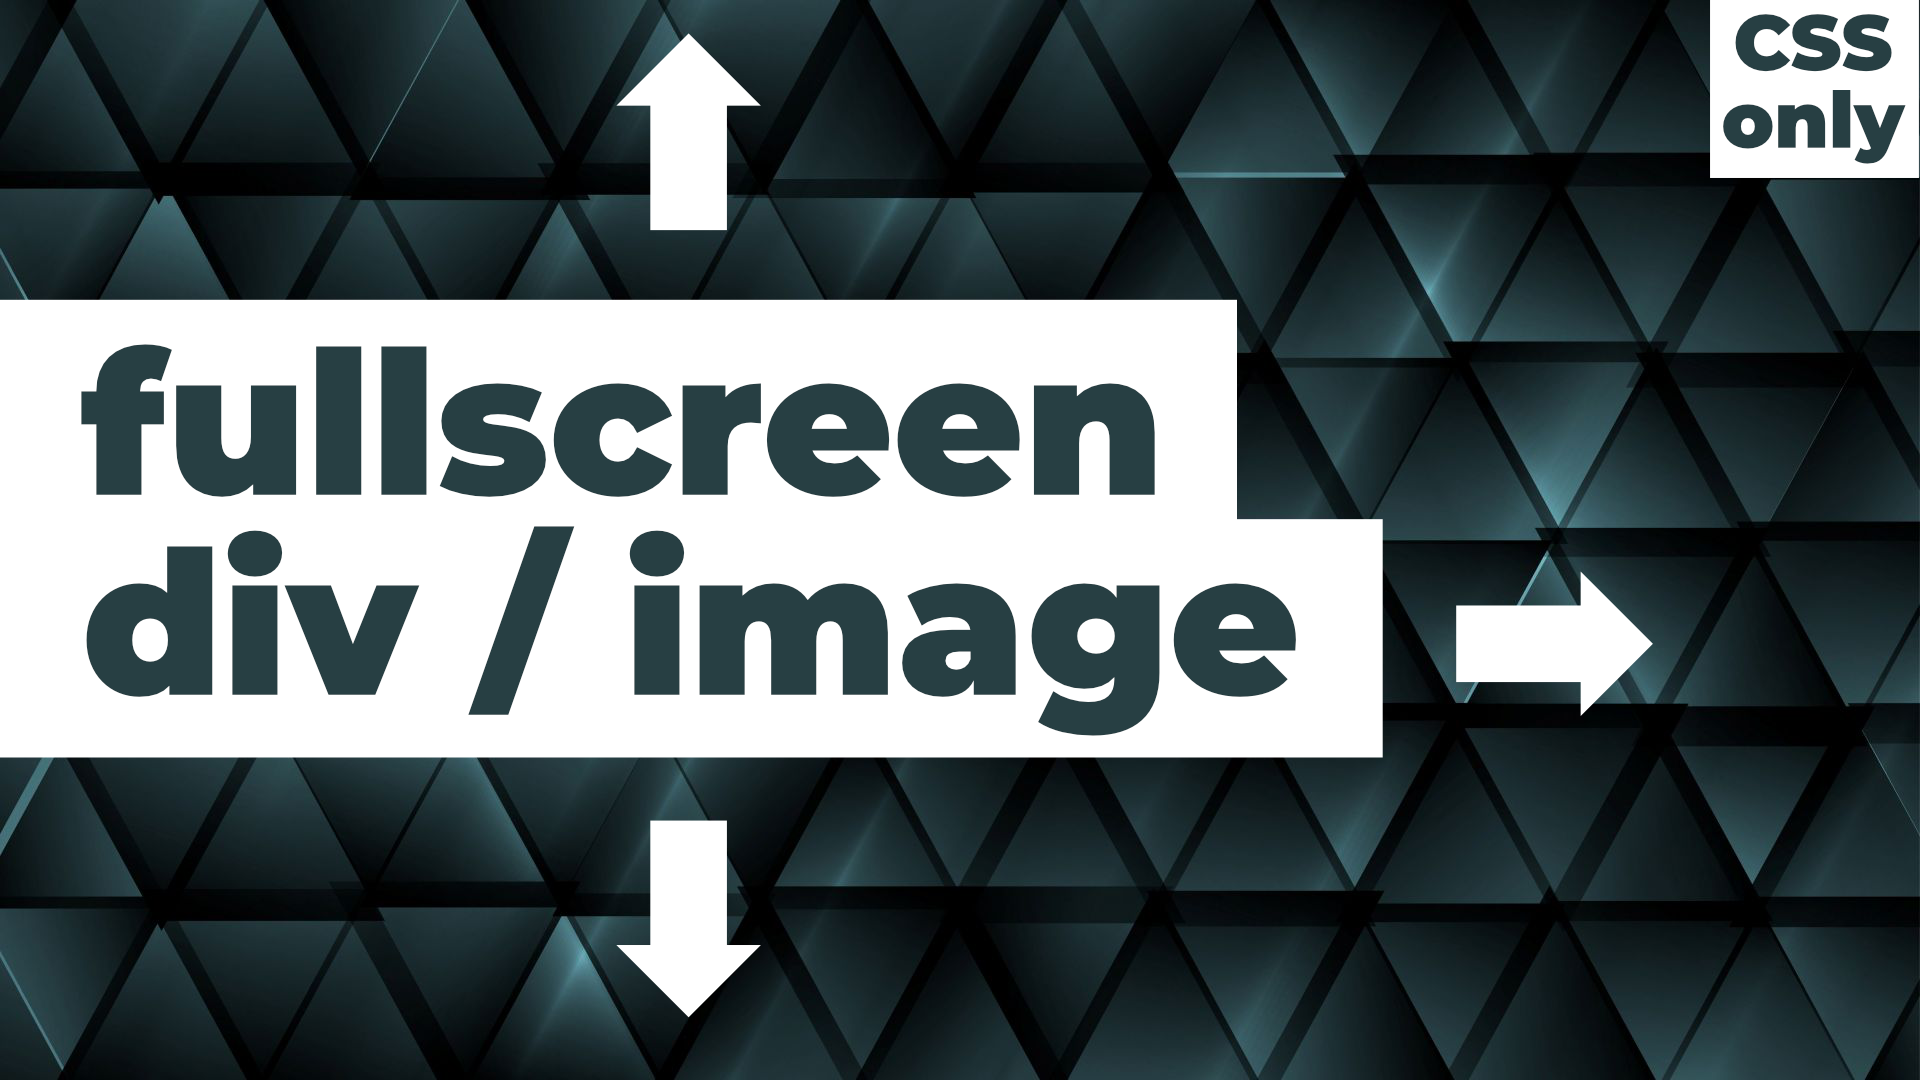 How to Make Image Full-Screen in HTML CSS